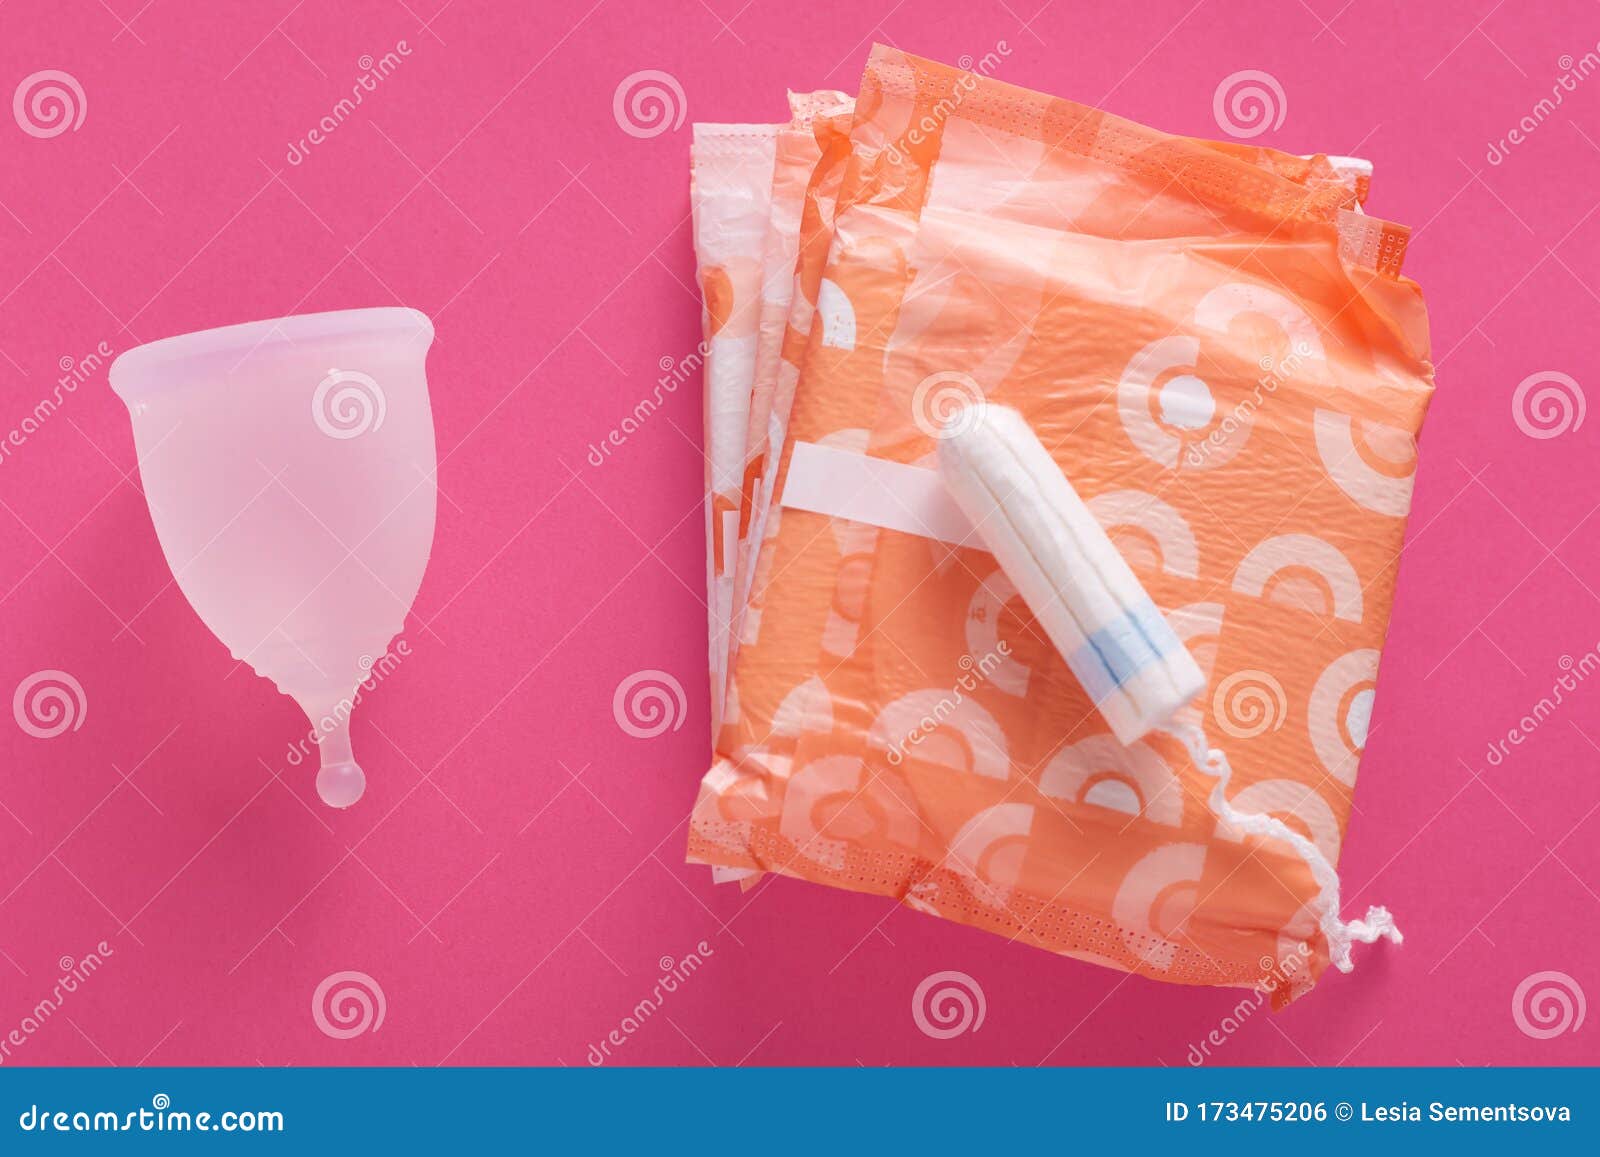 https://thumbs.dreamstime.com/z/different-types-feminine-hygiene-products-menstrual-cup-sanitary-pads-tampons-best-methods-women-isolated-over-pink-173475206.jpg